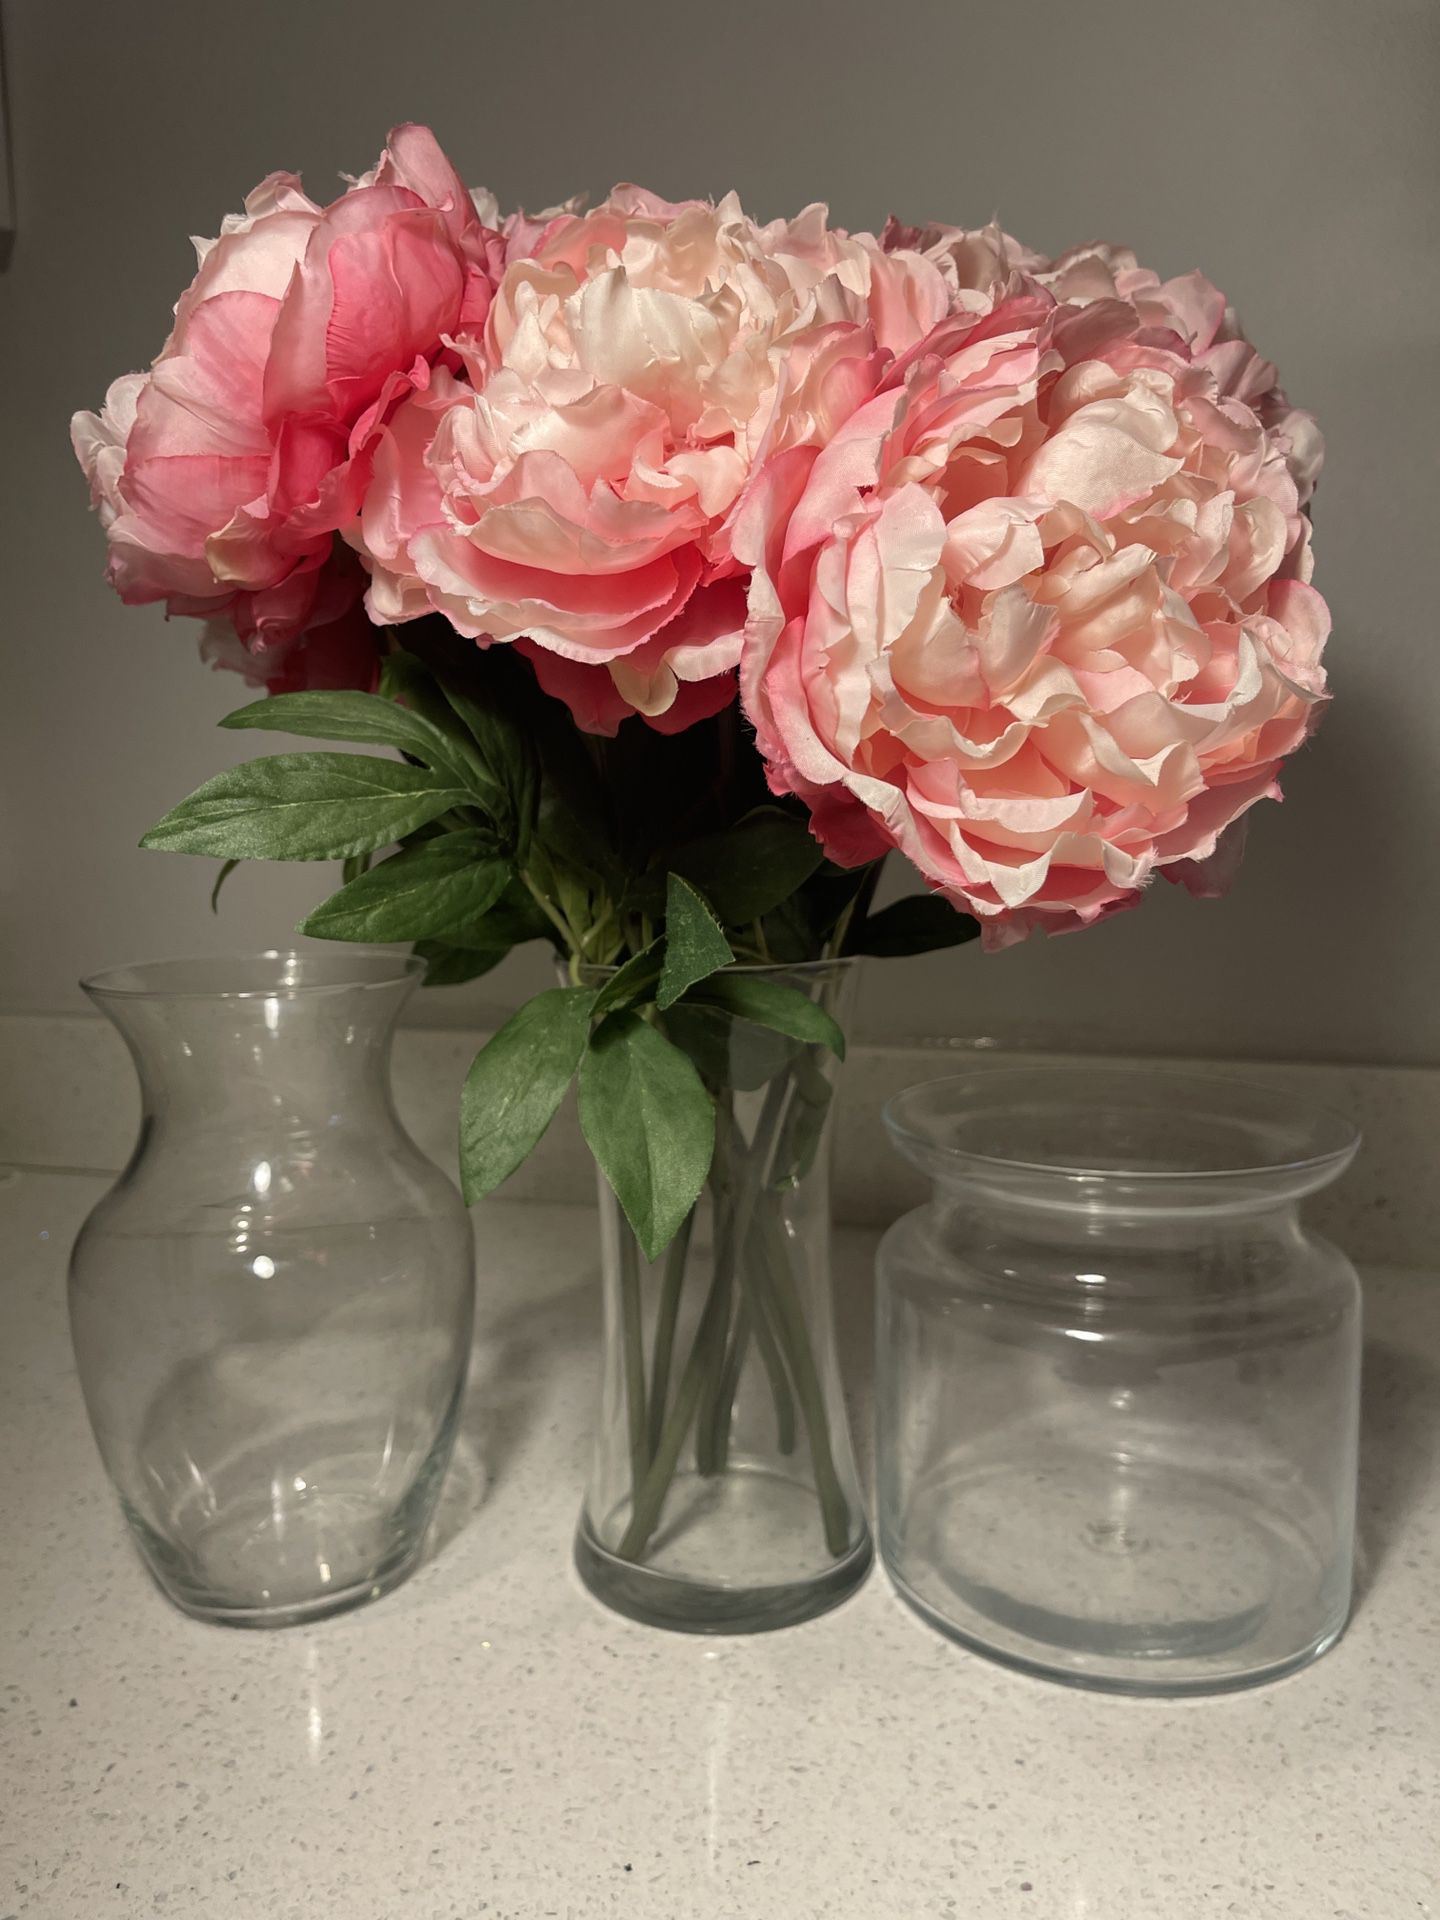 CLEAR GLASS VASES $1 EACH